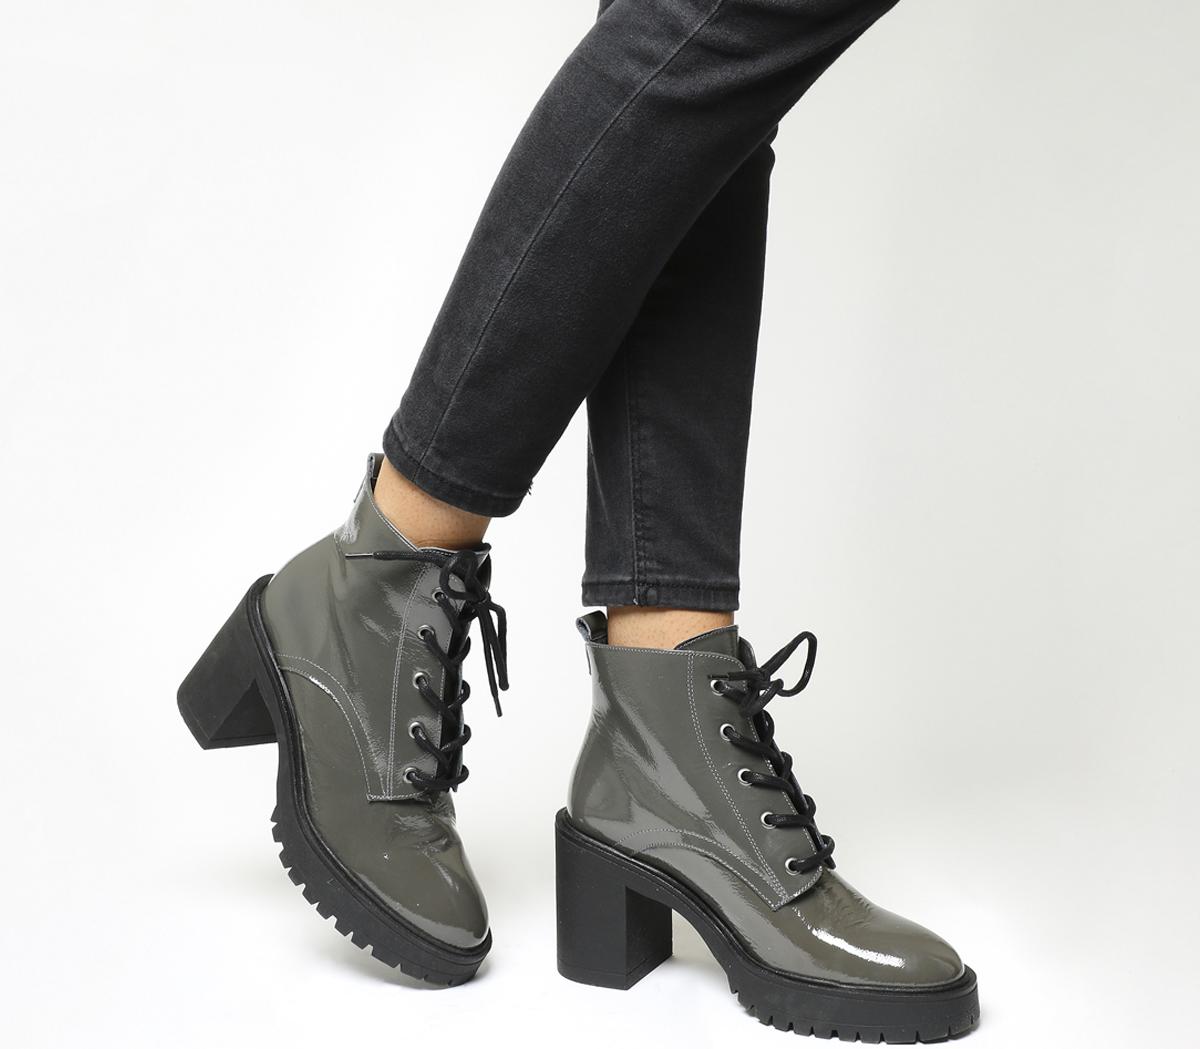 grey patent ankle boots